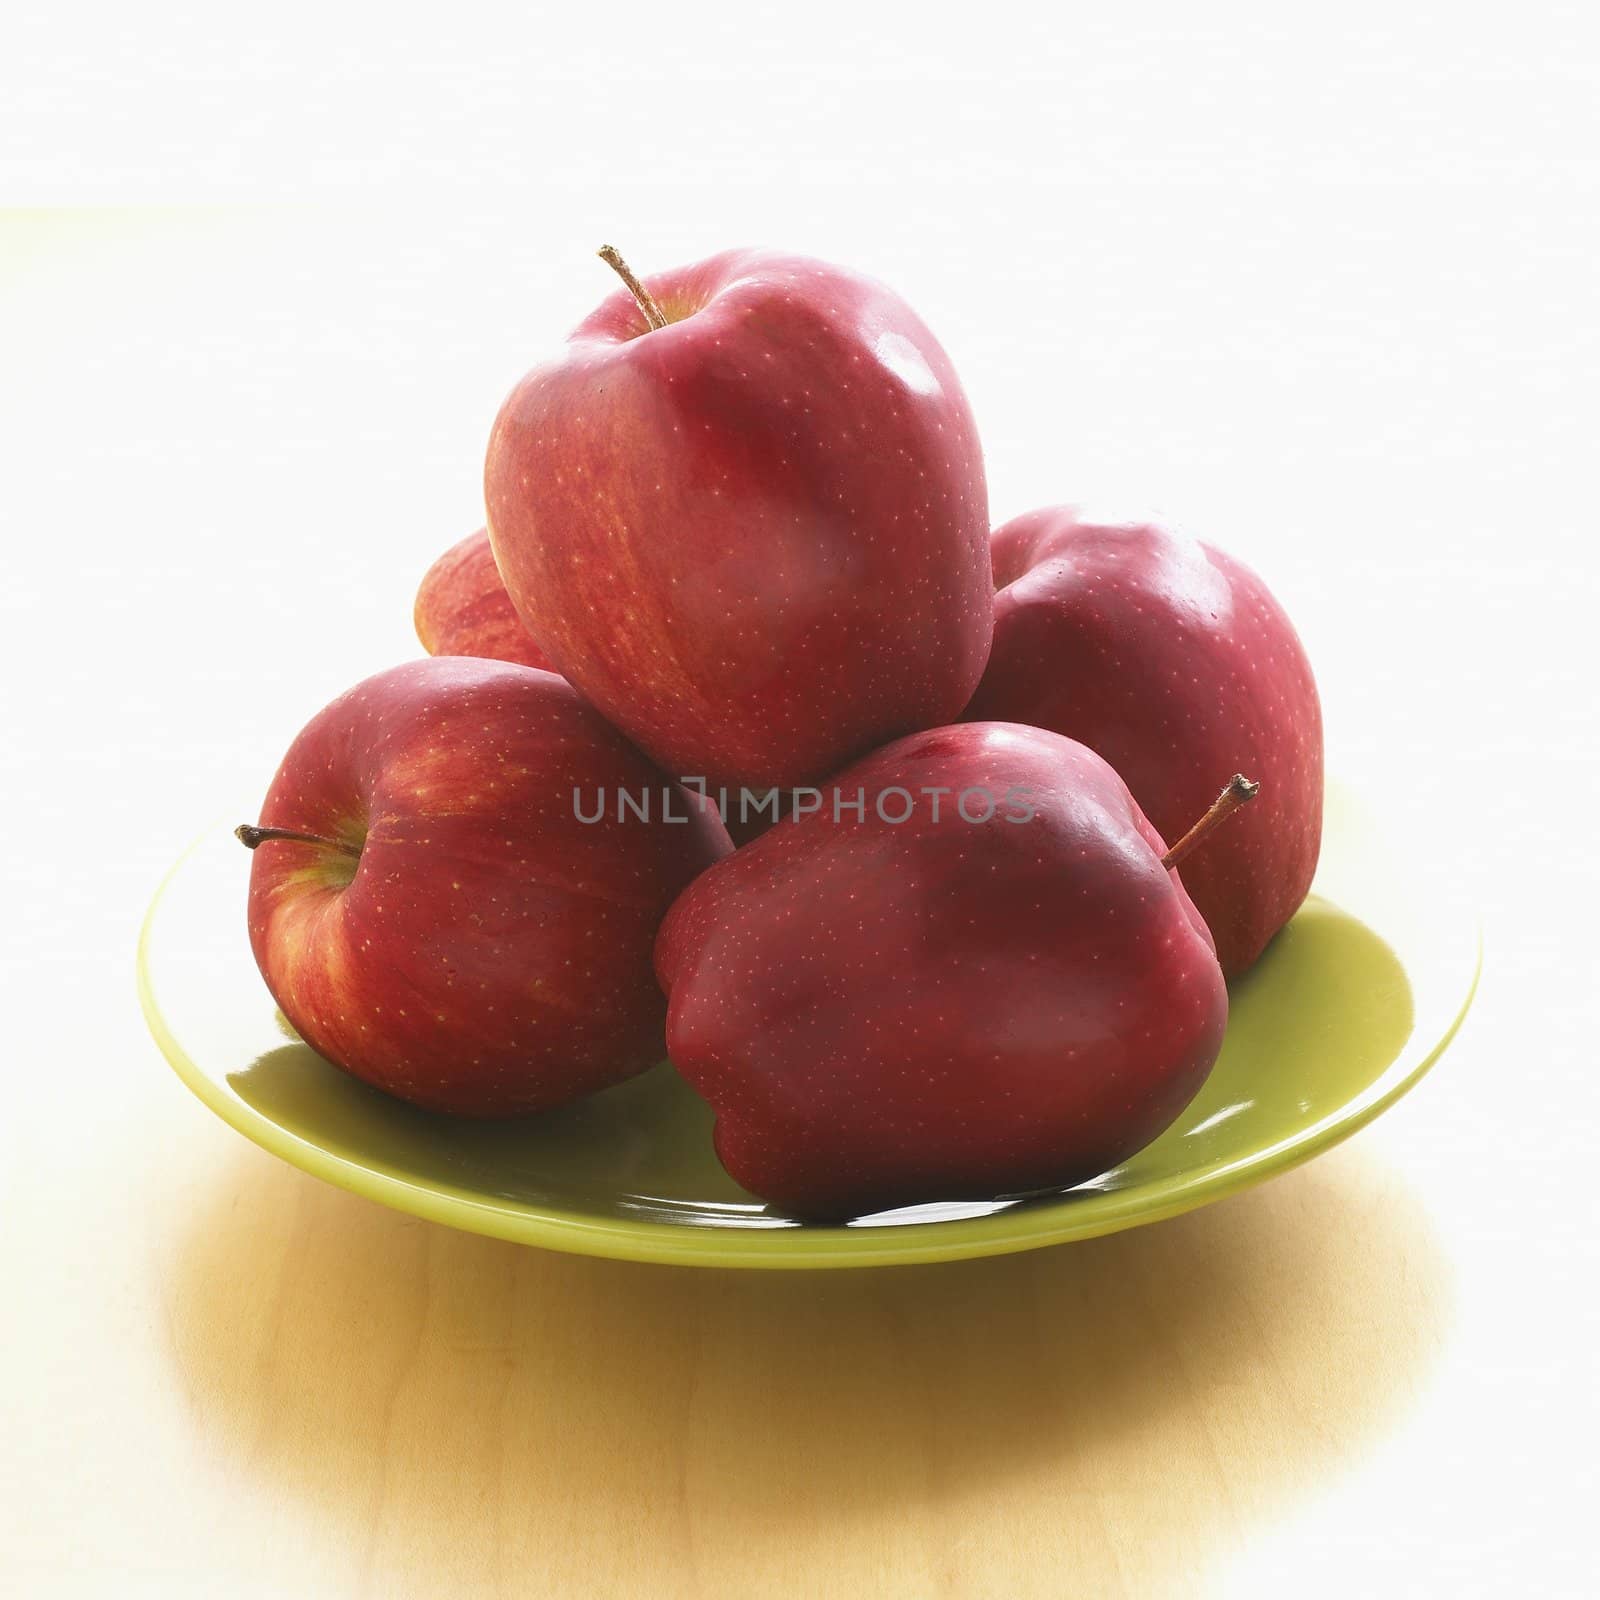 Plate of Red Apples by tornellistefano